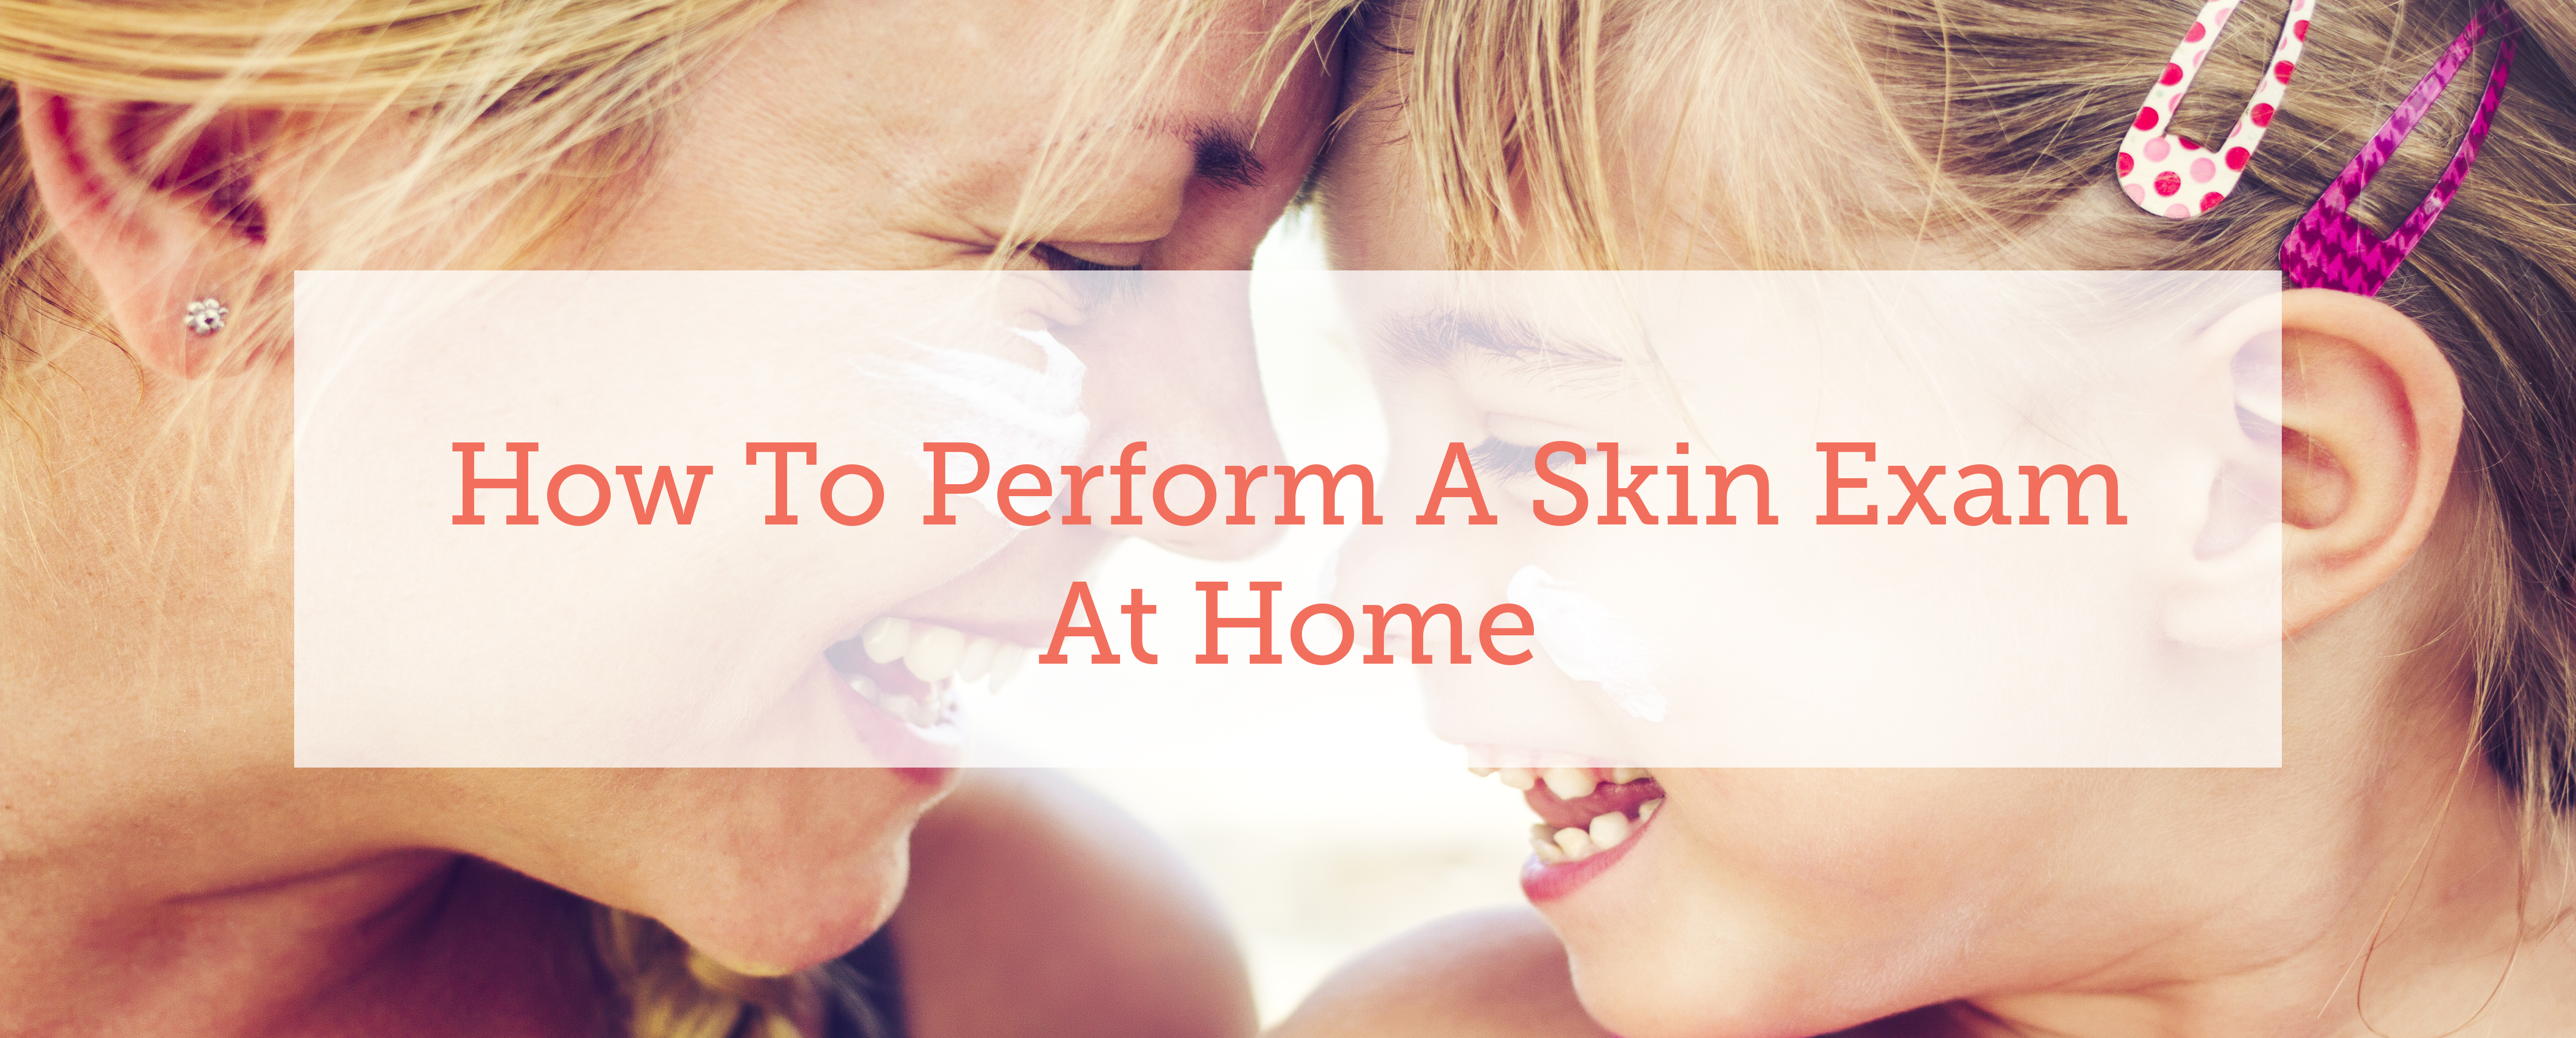 How to Perform a Skin Exam at Home